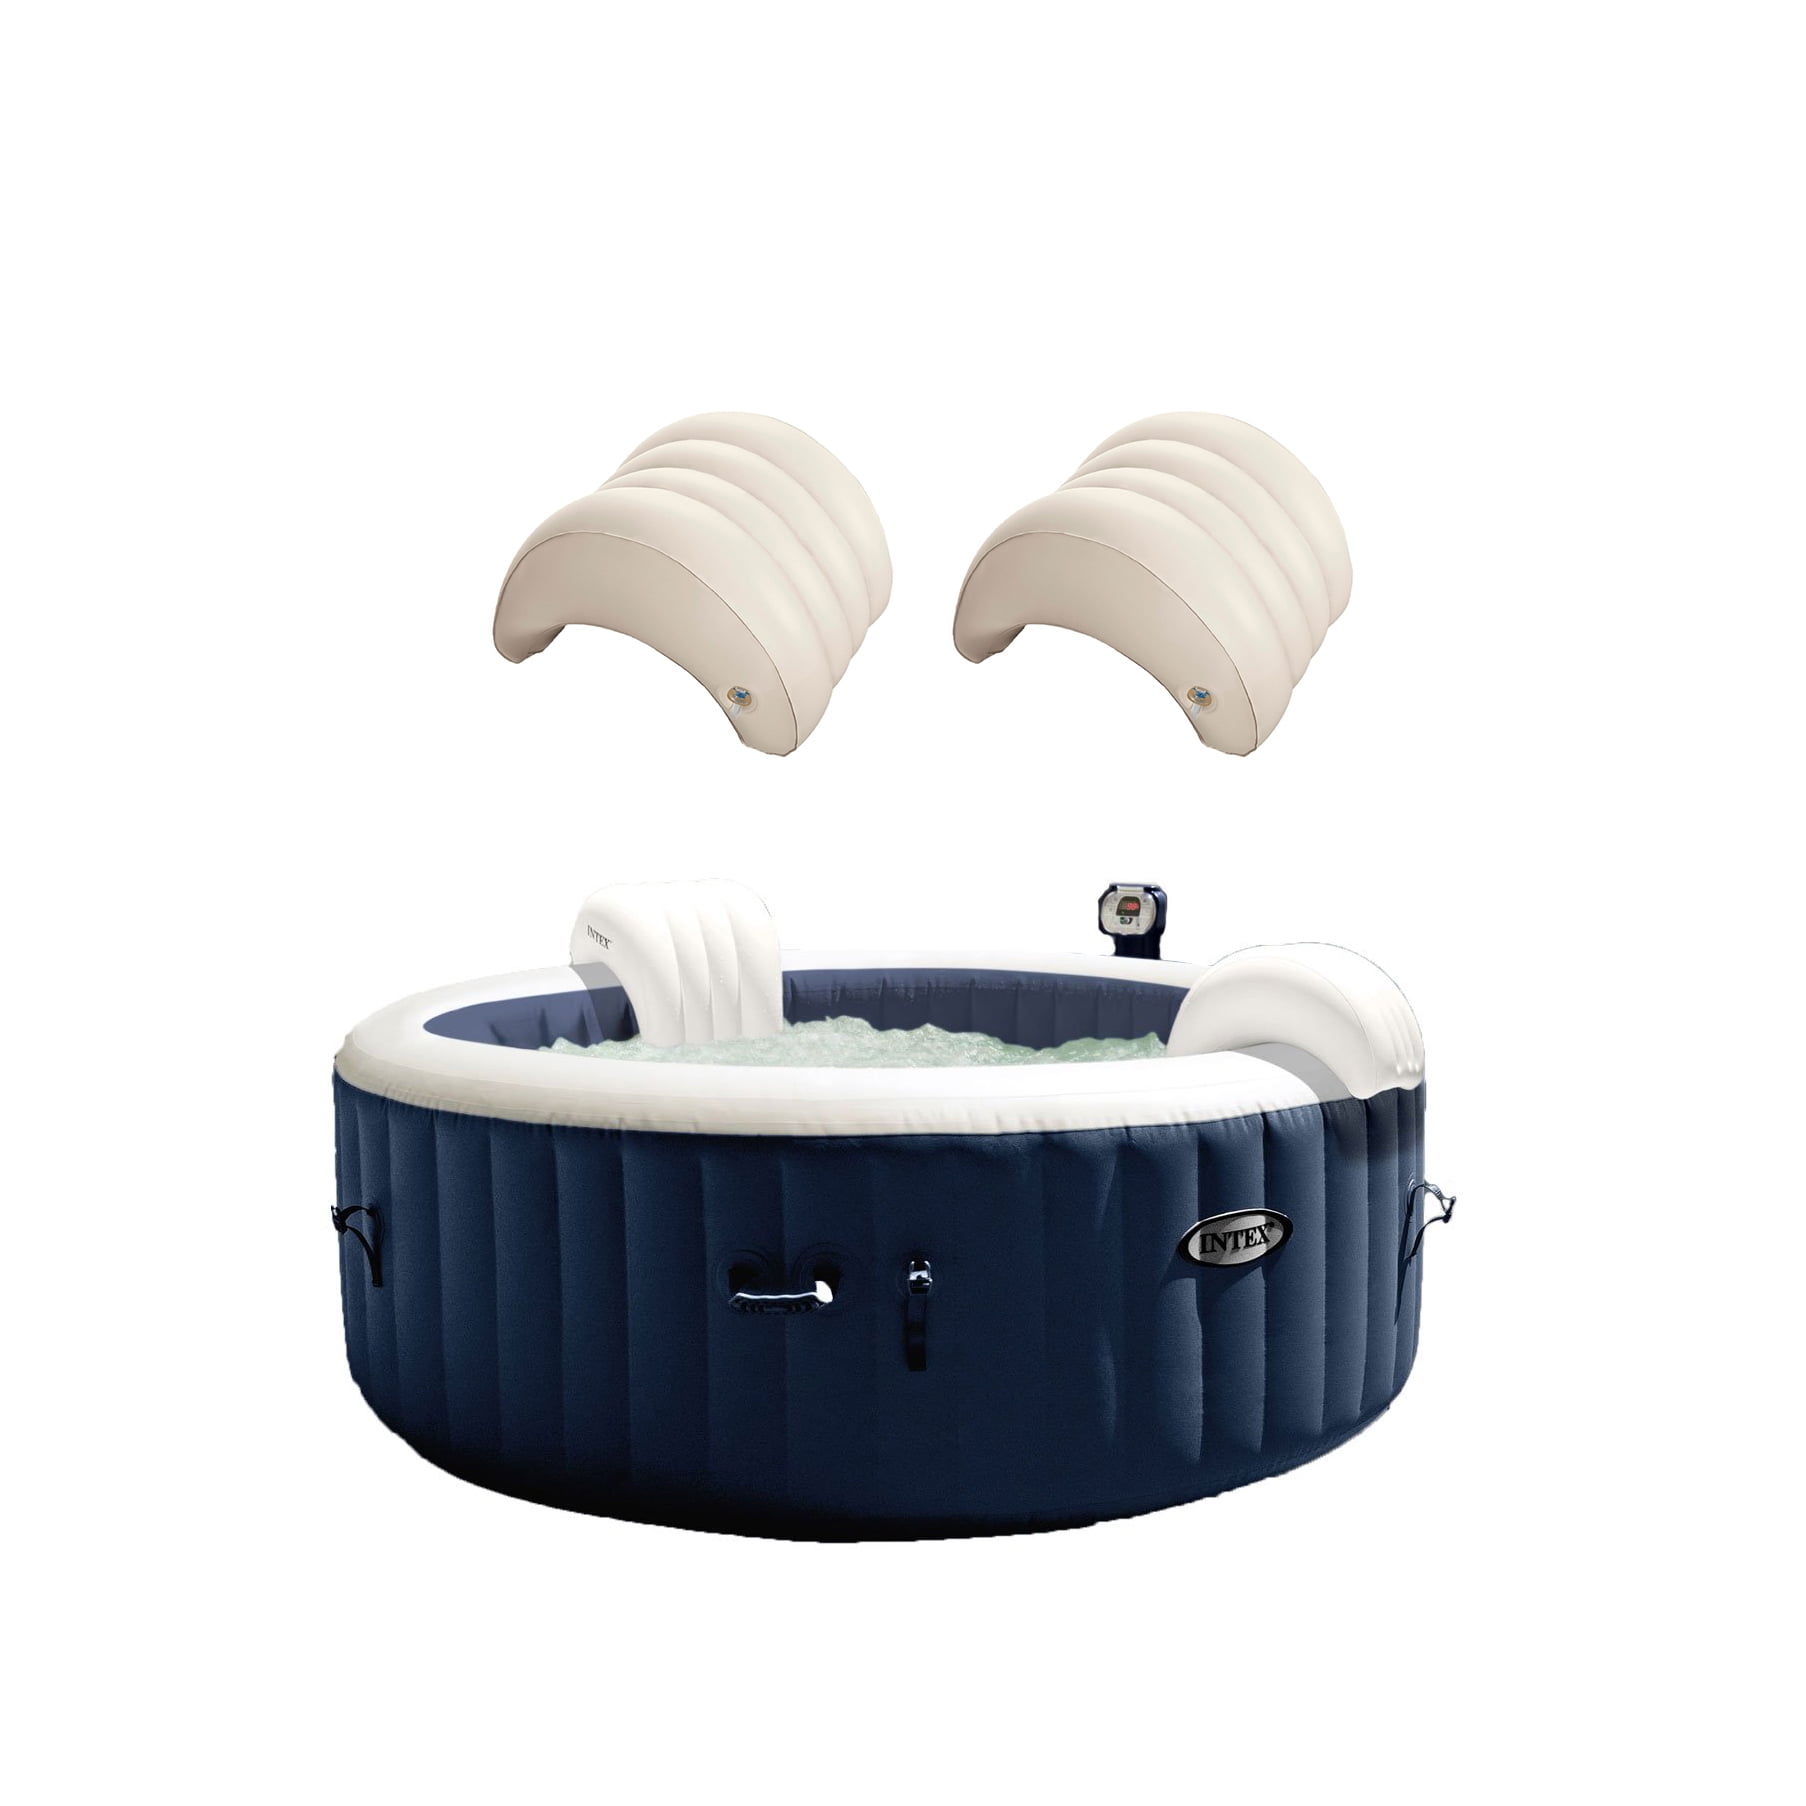 Intex Purespa 4 Person Inflatable Portable Hot Tub And Headrest Pillow 2 Pack